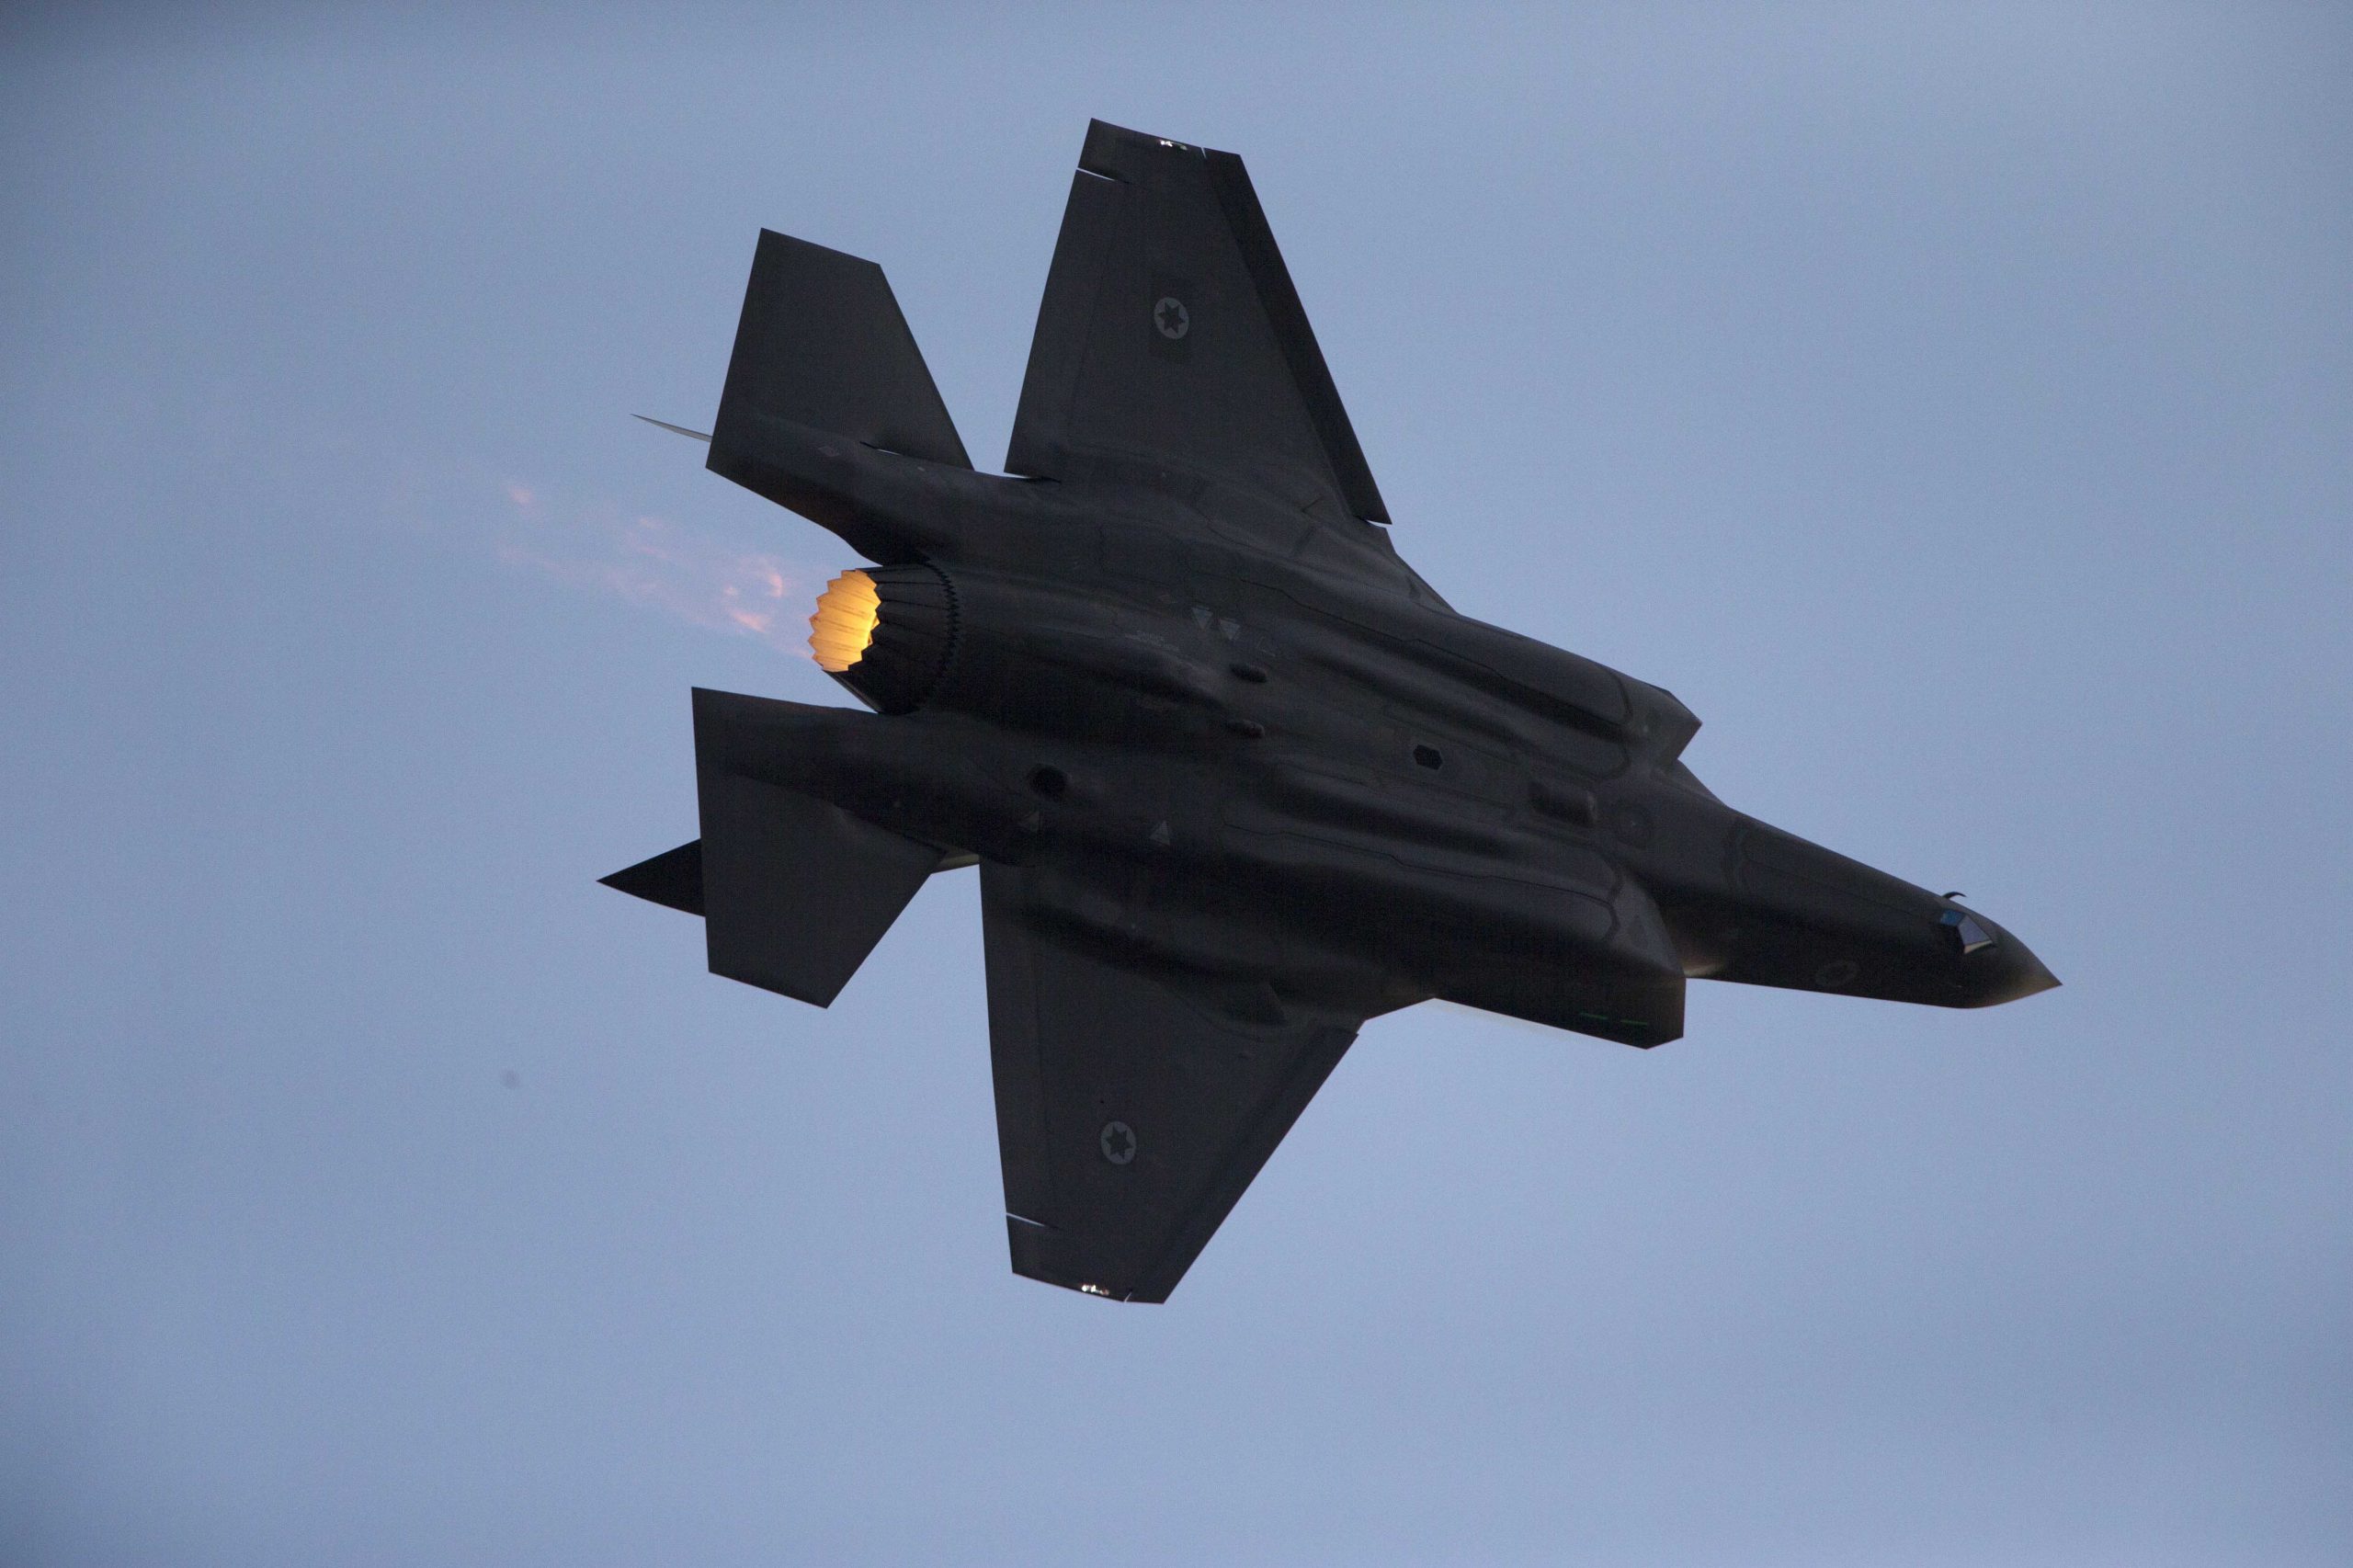 The United States plans to sell 50 F-35 combat aircraft to the UAE following an agreement with Israel

